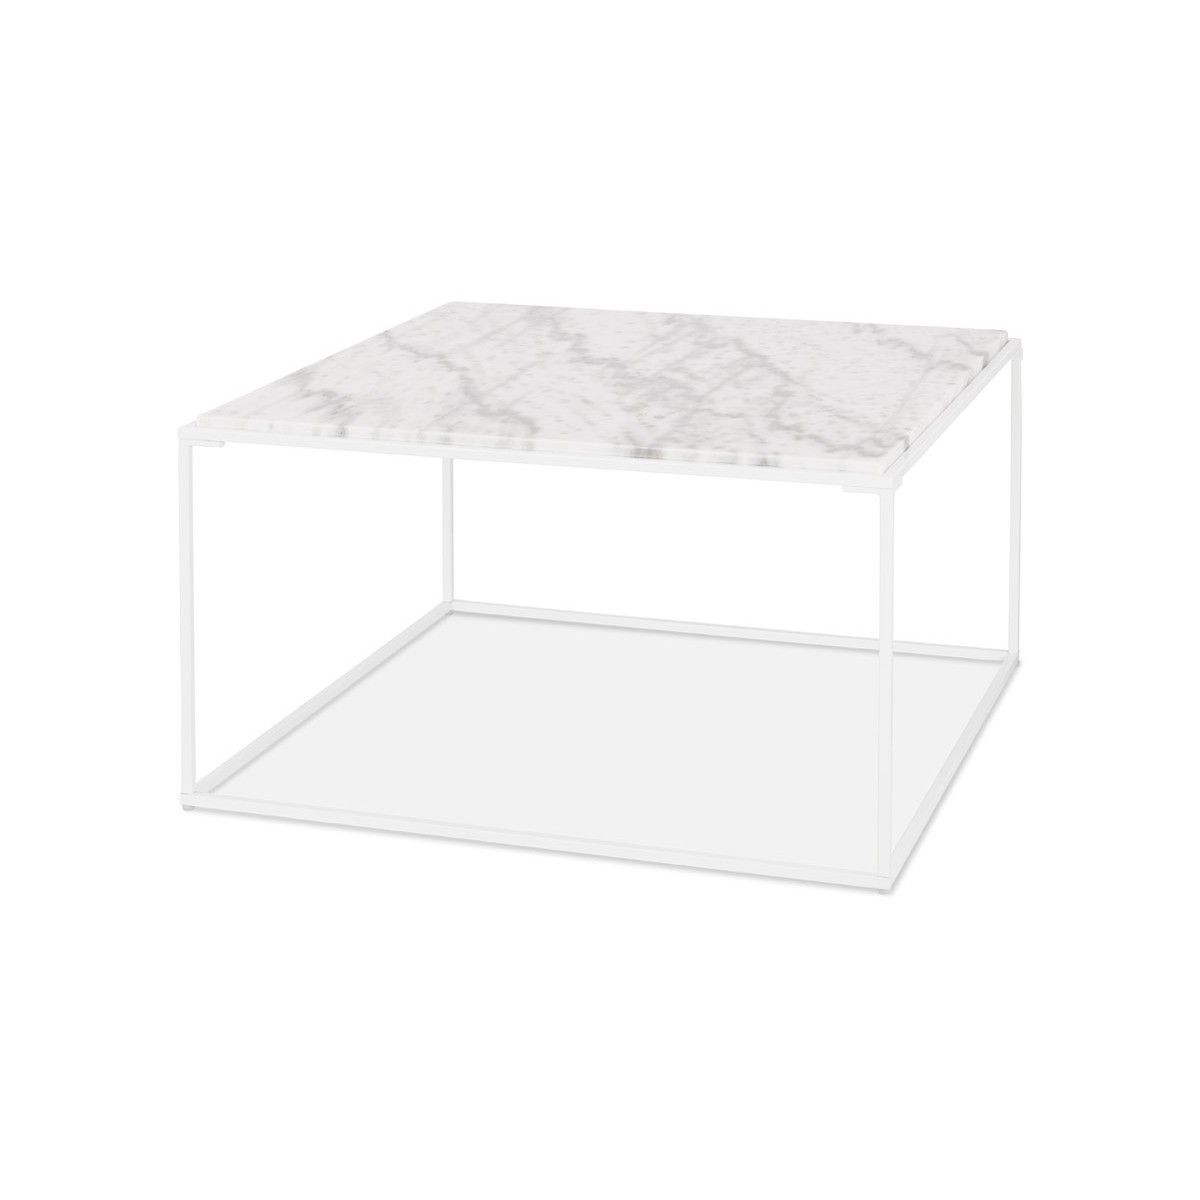 Robyn Marbled Stone Design Coffee Table (white) – Amp Story 6966 In Newest Deco Stone Coffee Tables (View 7 of 20)